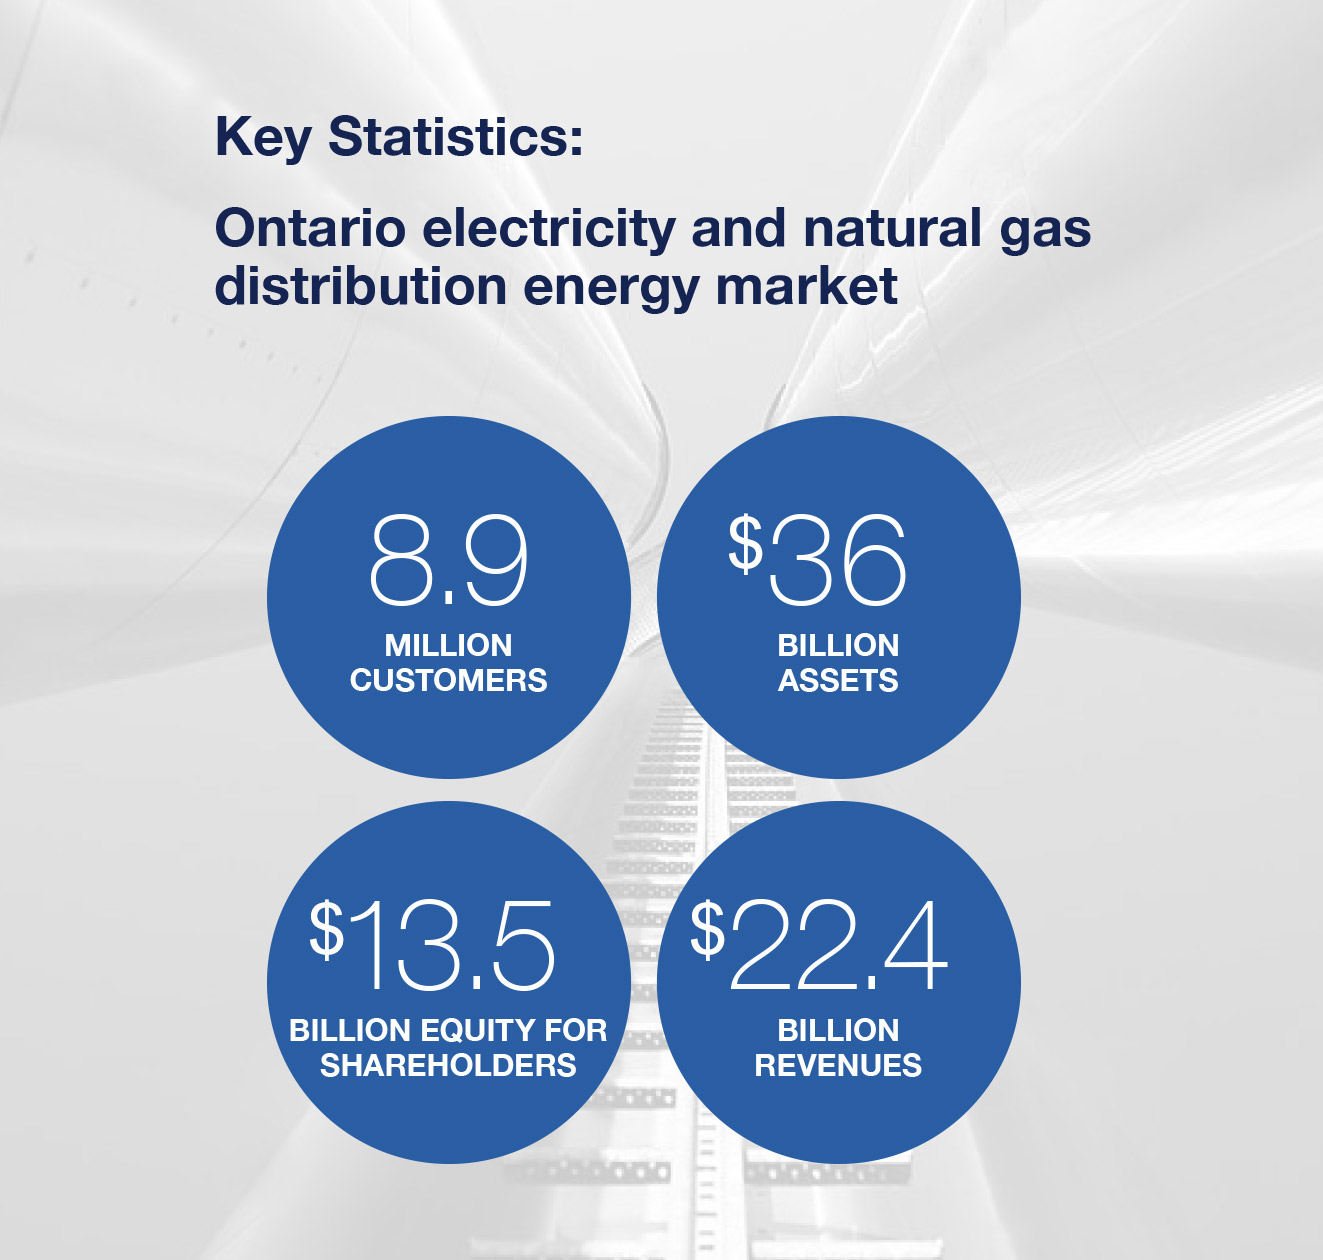 Key statistics: Ontario electricity and natural gas distribution energy market